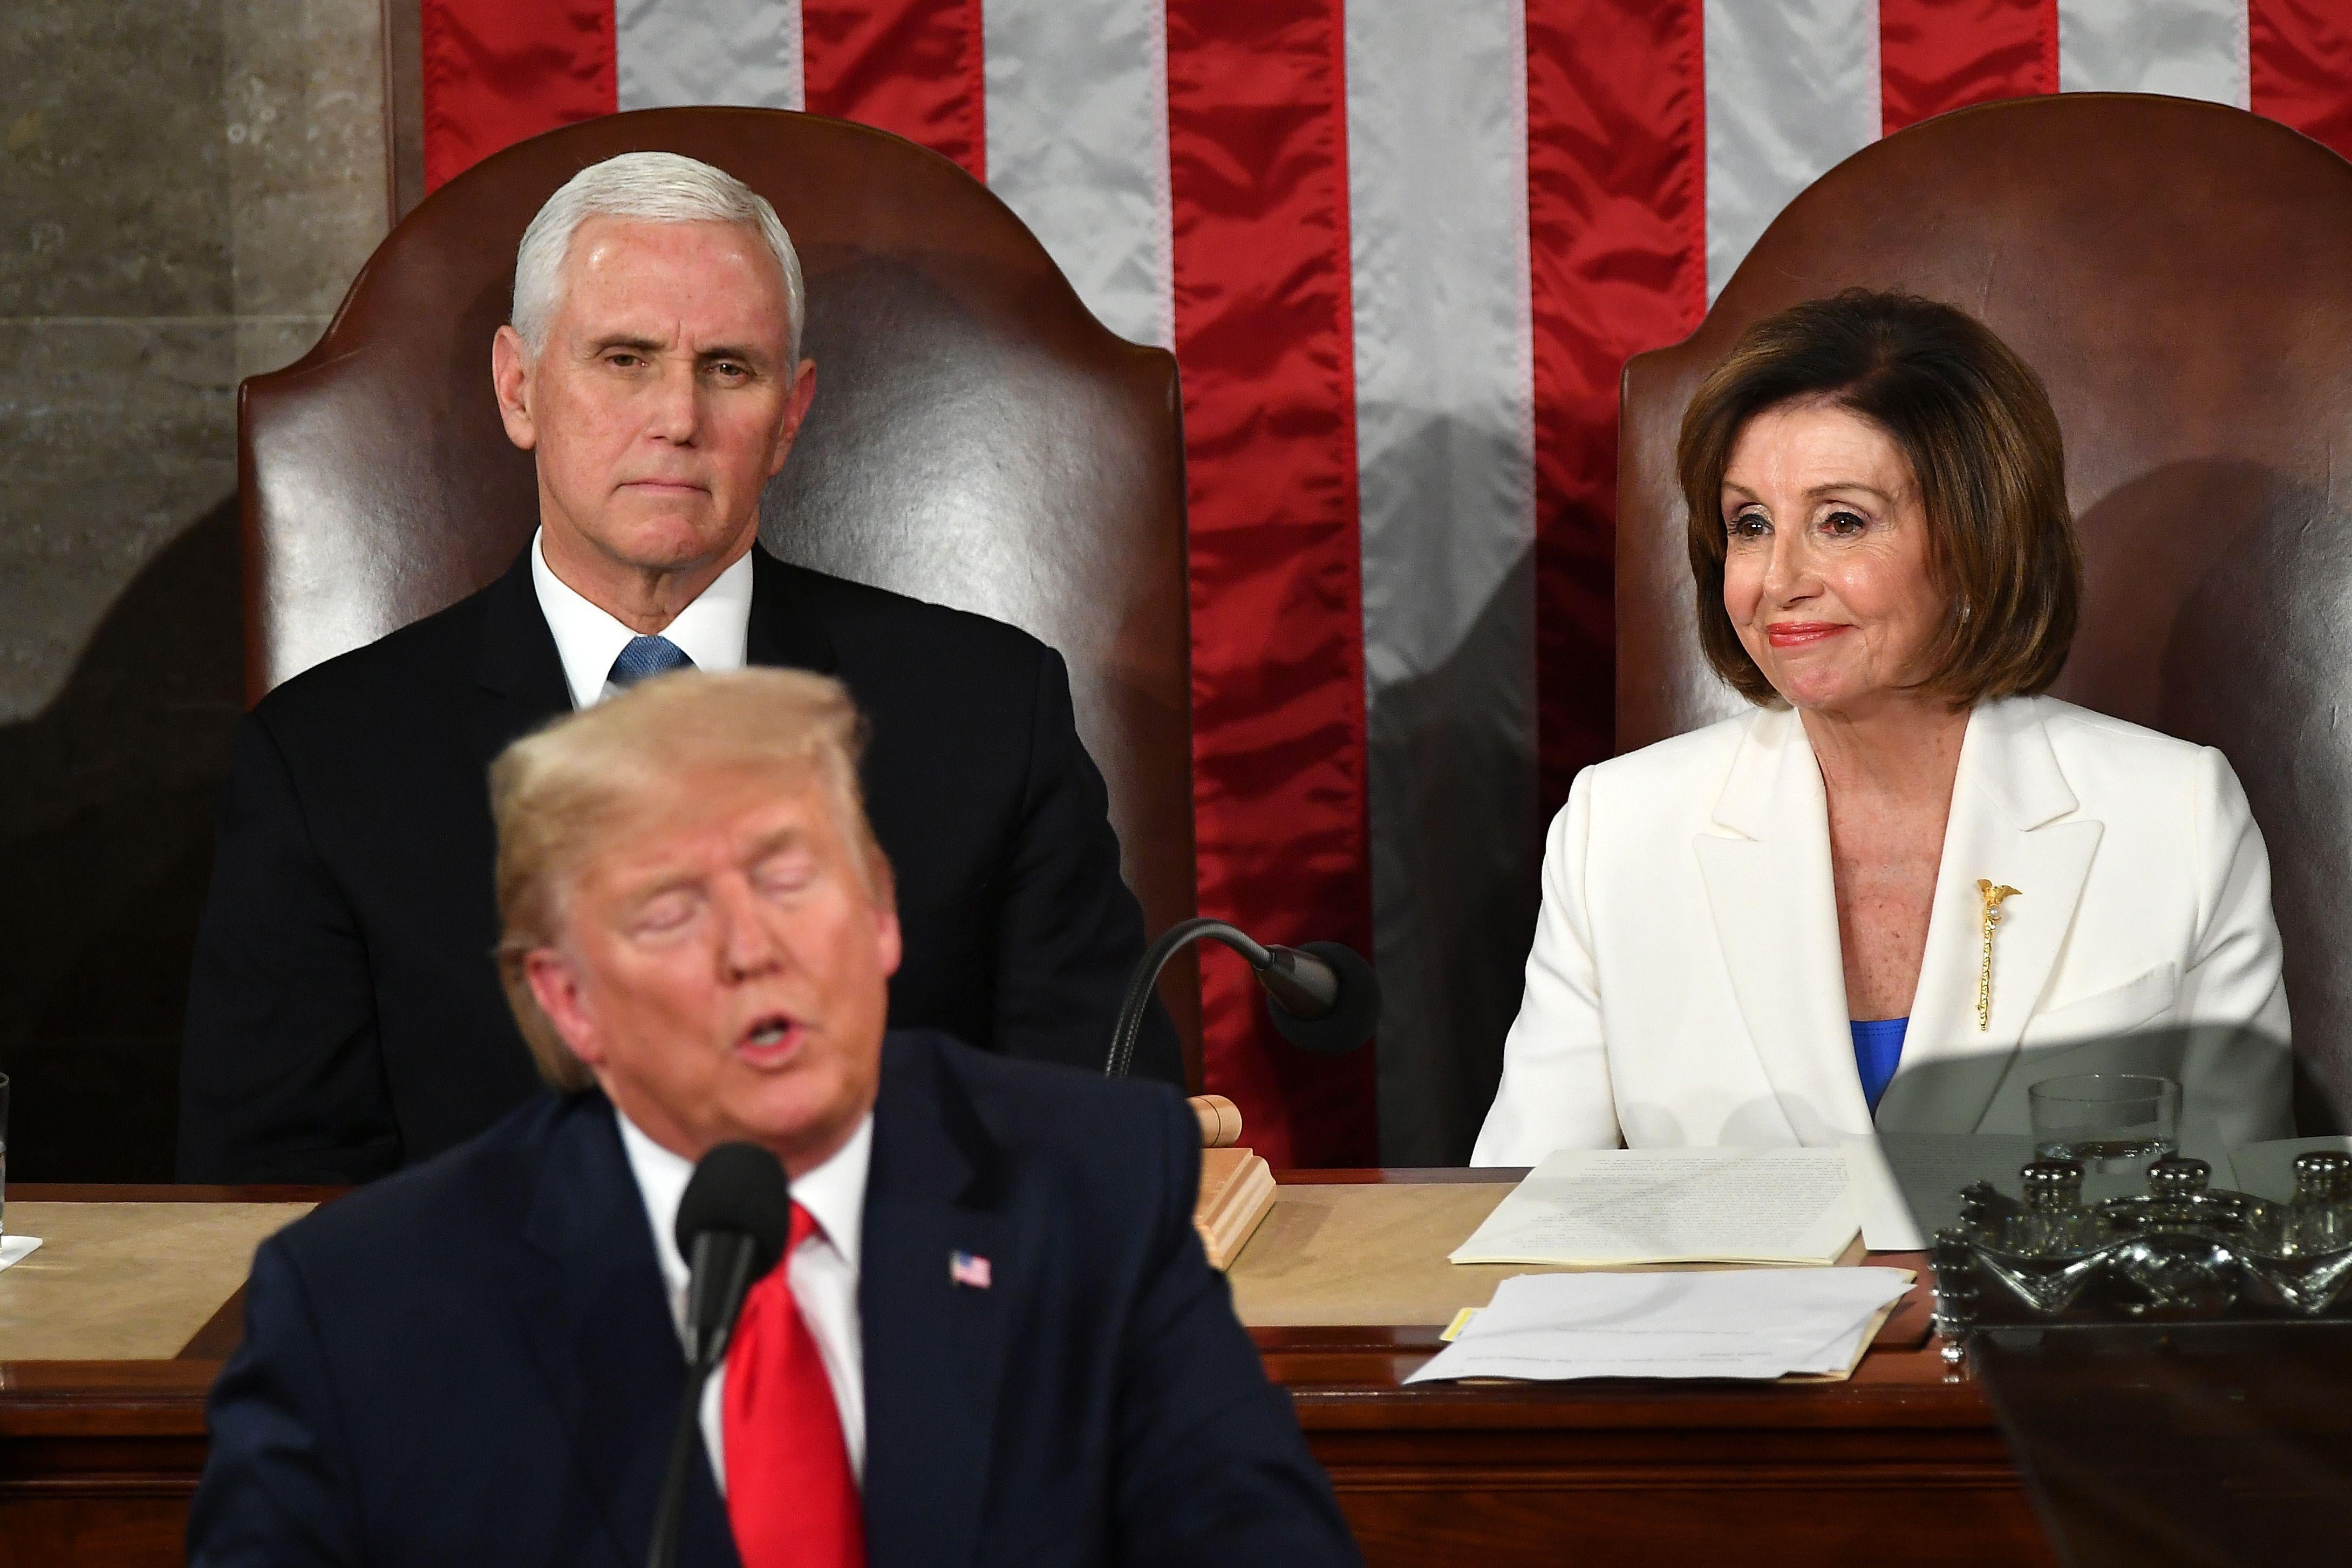 Mike Pence and Nancy Pelosi seated behind Donald Trump as he delivers the State of the Union address.